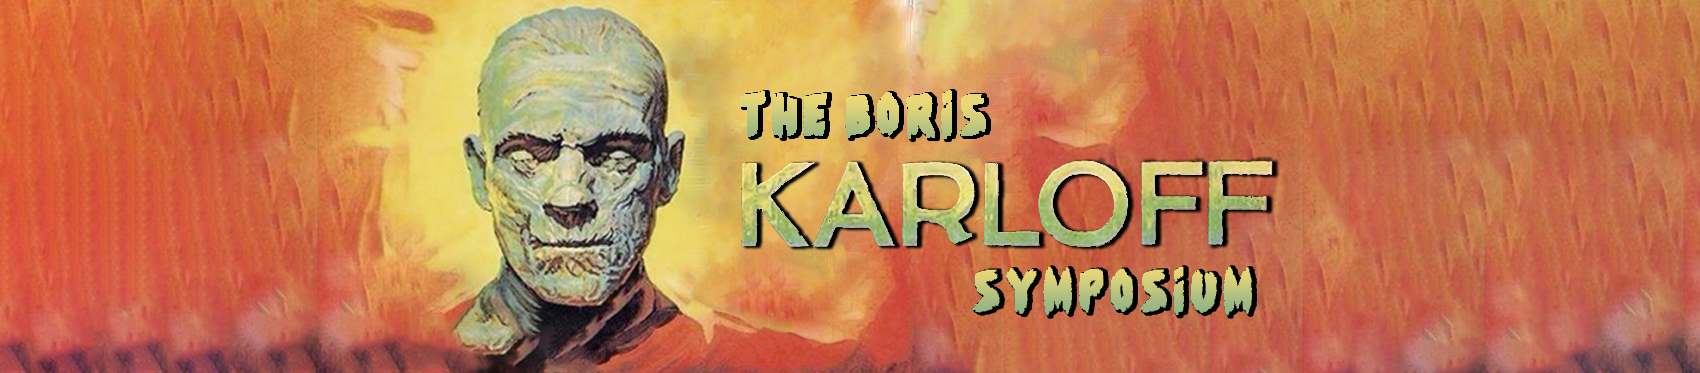 Boris Karloff The Many Faces of a Film Icon An Online Symposium PLYMOUTH COLLEGE OF ART banner